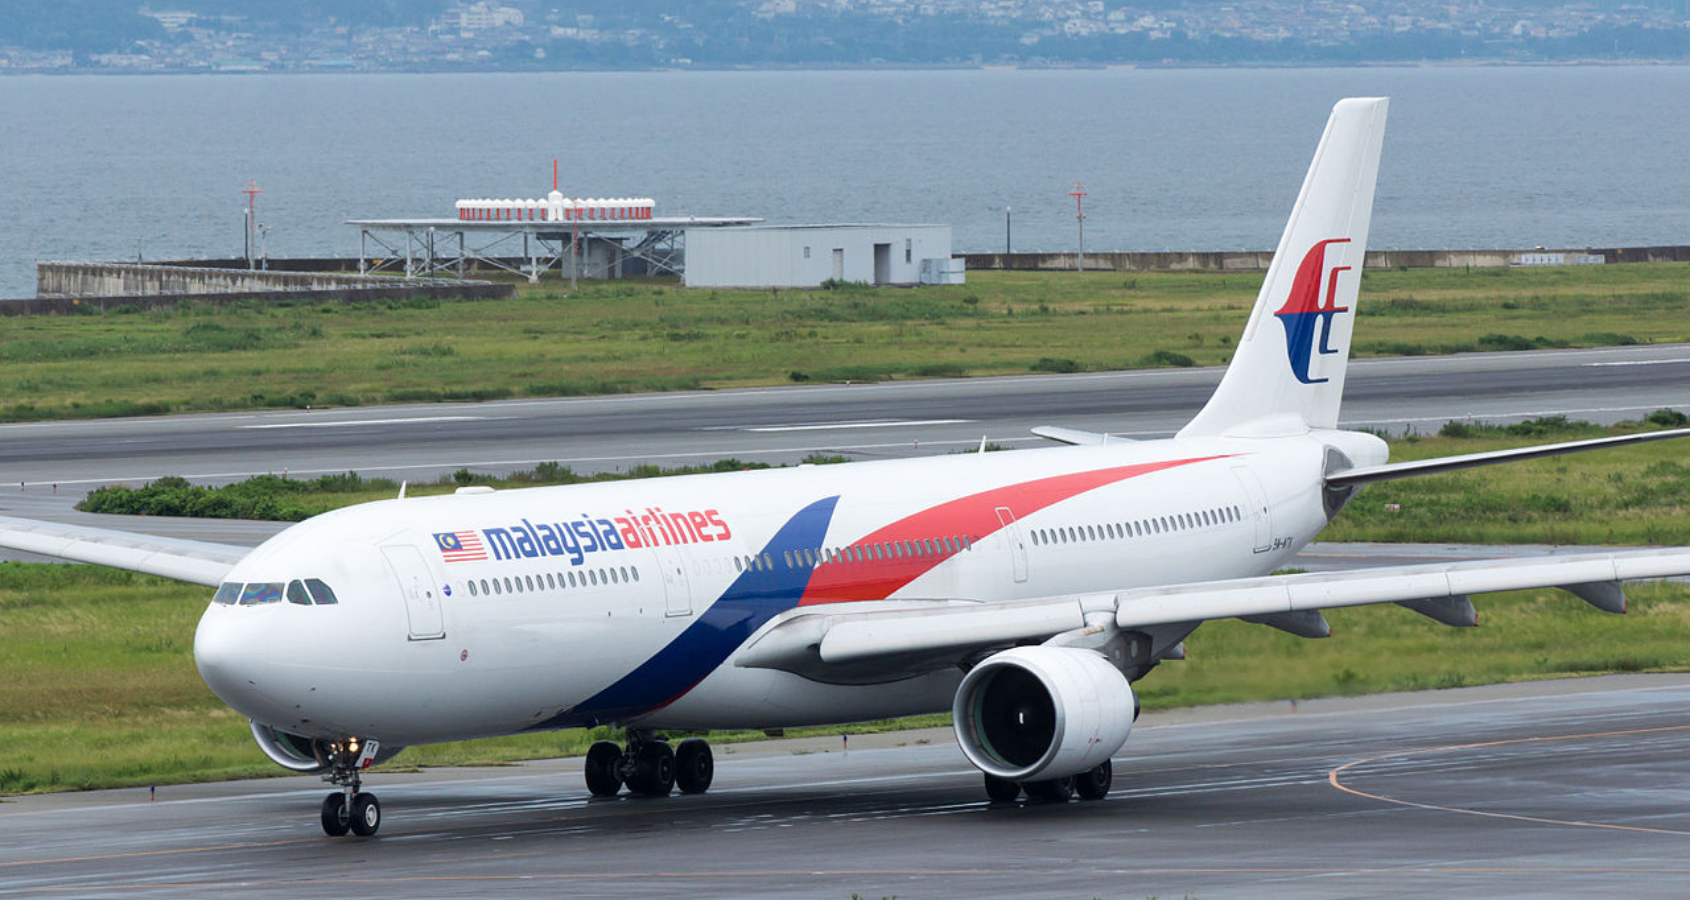 Malaysia Airlines must renew negotiations with cabin crew union